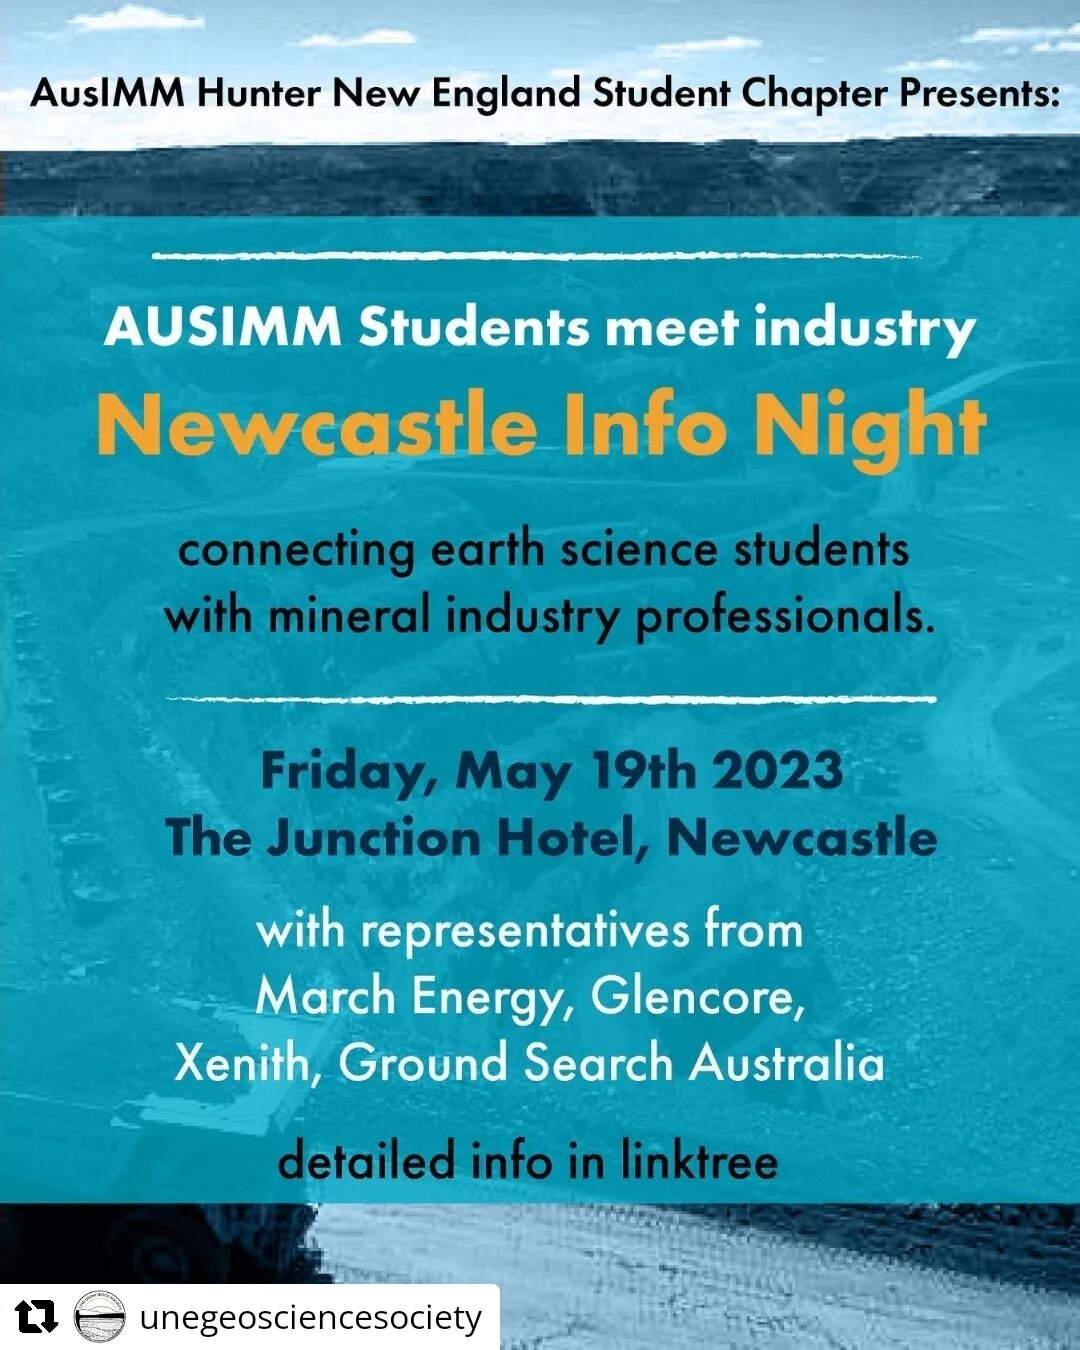 #Repost @unegeosciencesociety with @let.repost 
&bull; &bull; &bull; &bull; &bull; &bull;
AusIMM are hosting a students meet industry night in Newcastle, May 19th. It&rsquo;s a great way to hear directly from employers and start building a network wi